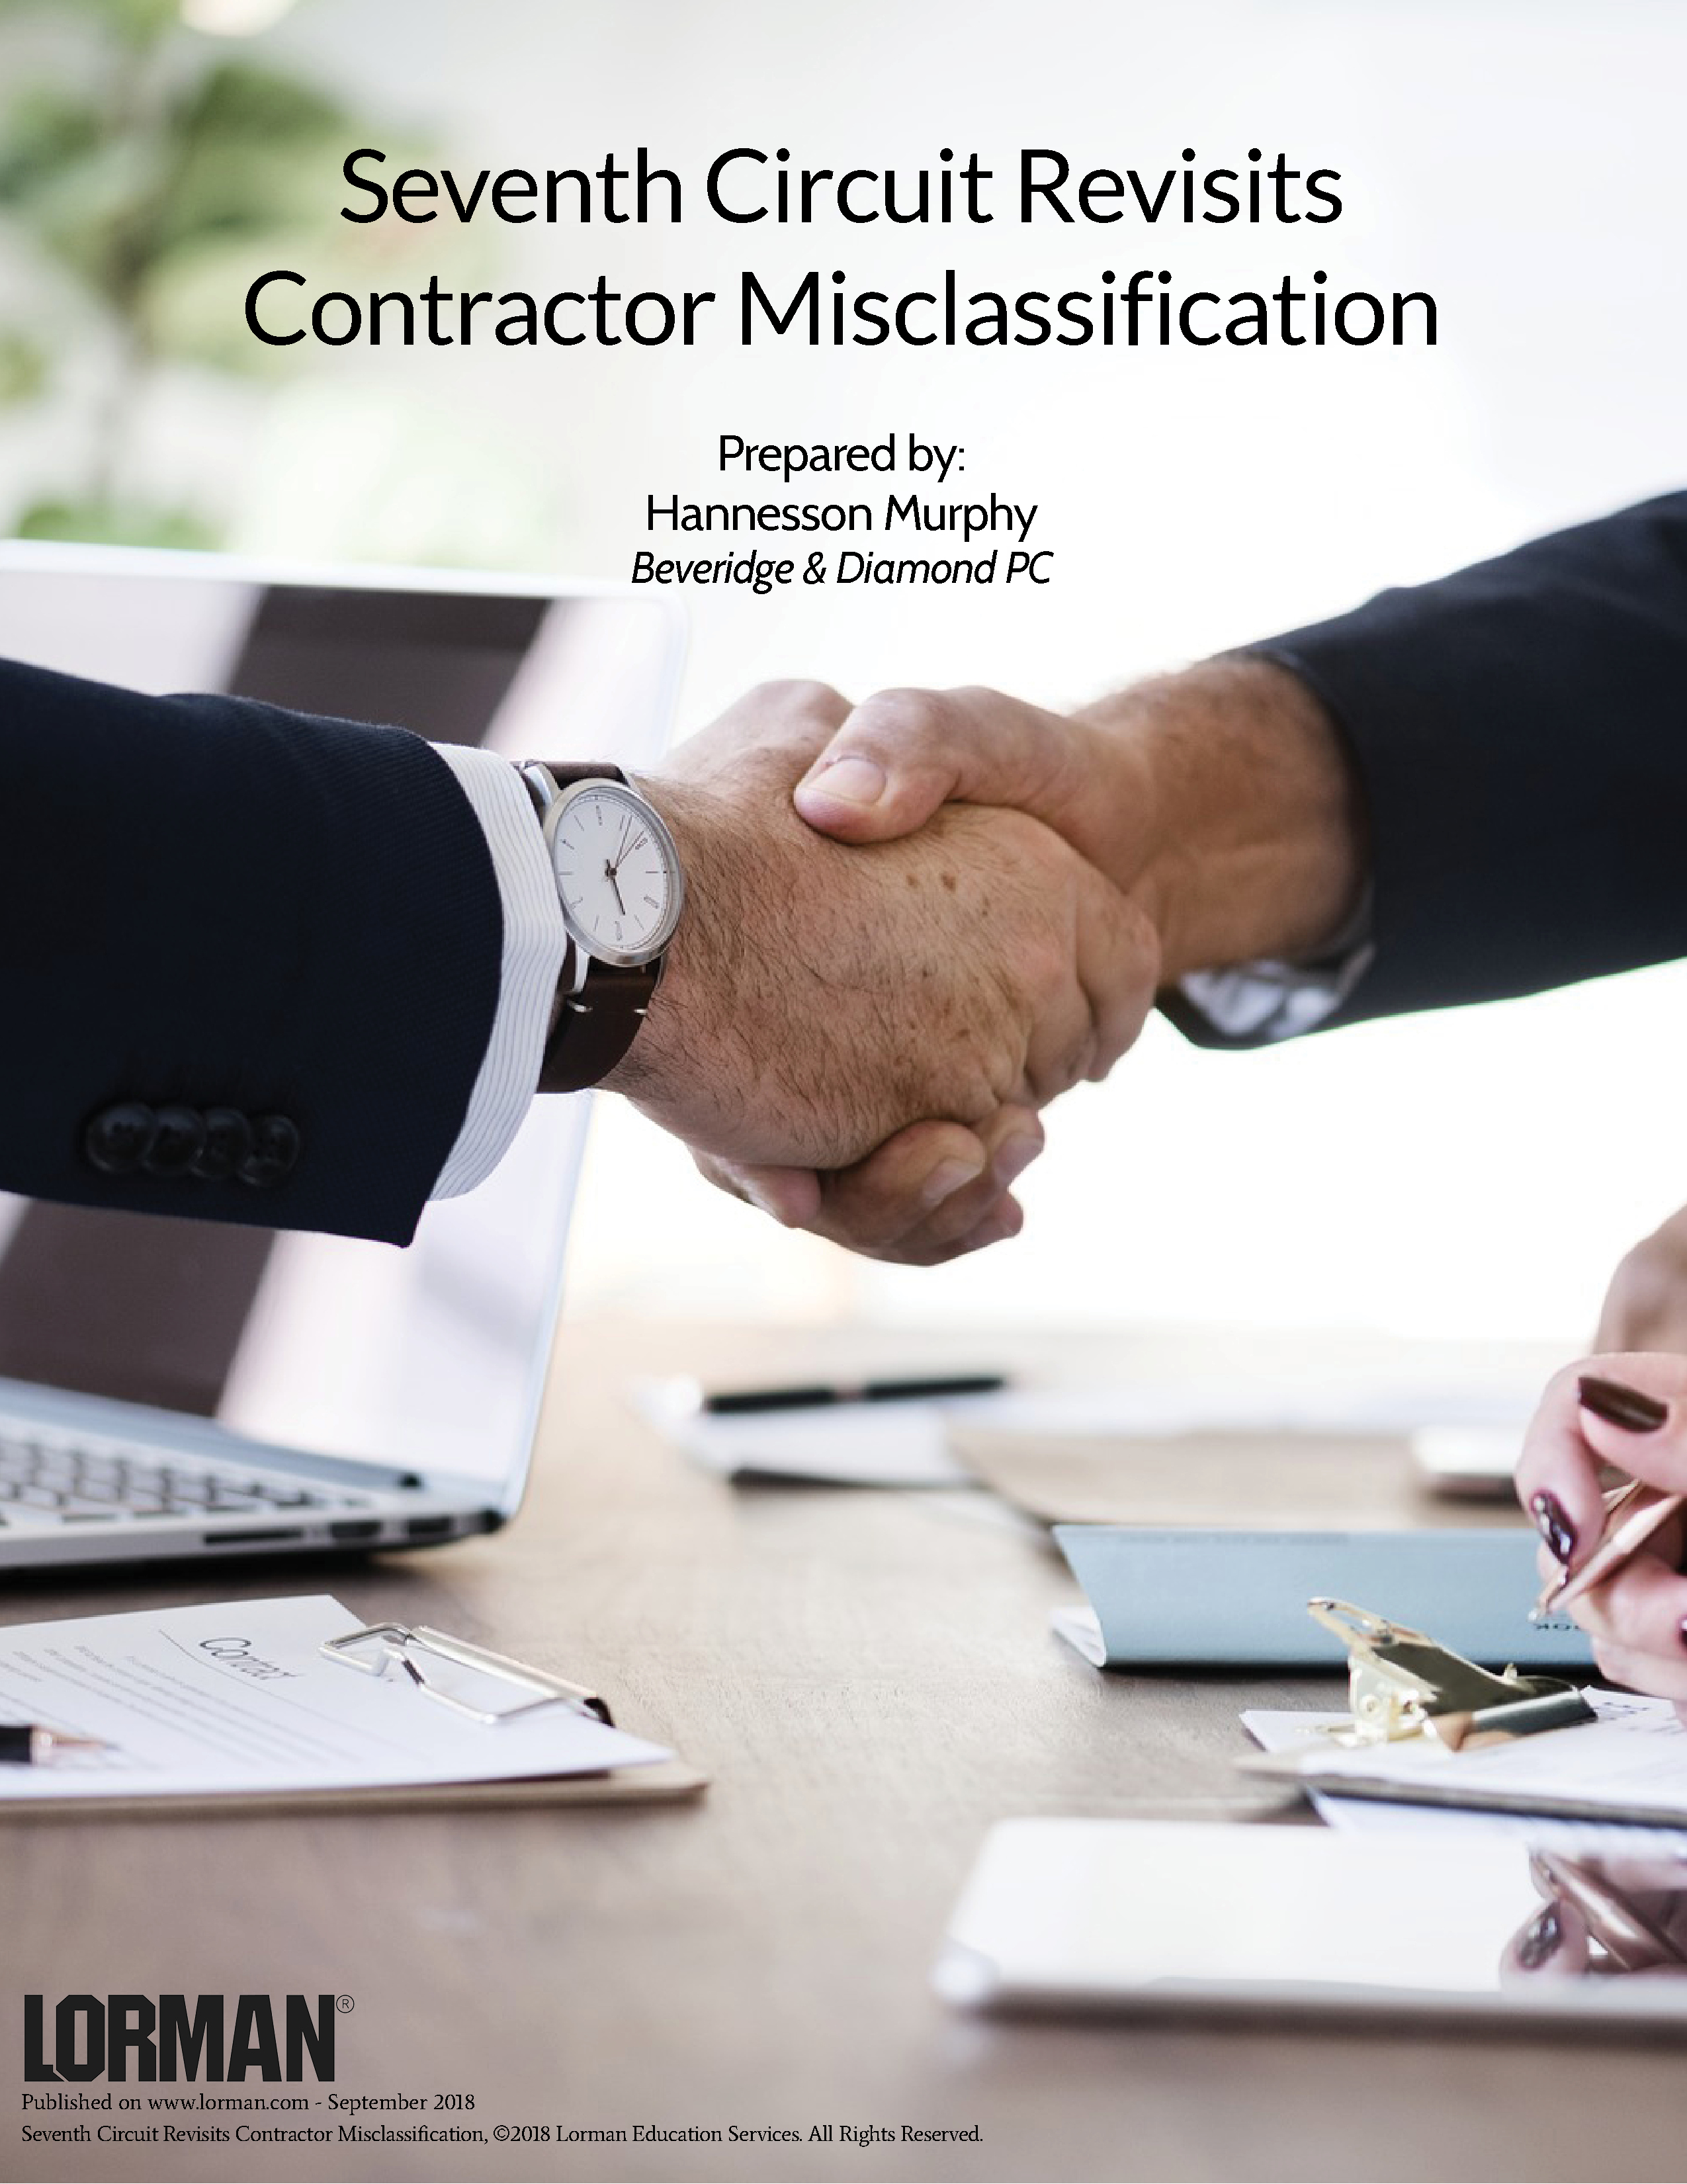 Seventh Circuit Revisits Contractor Misclassification